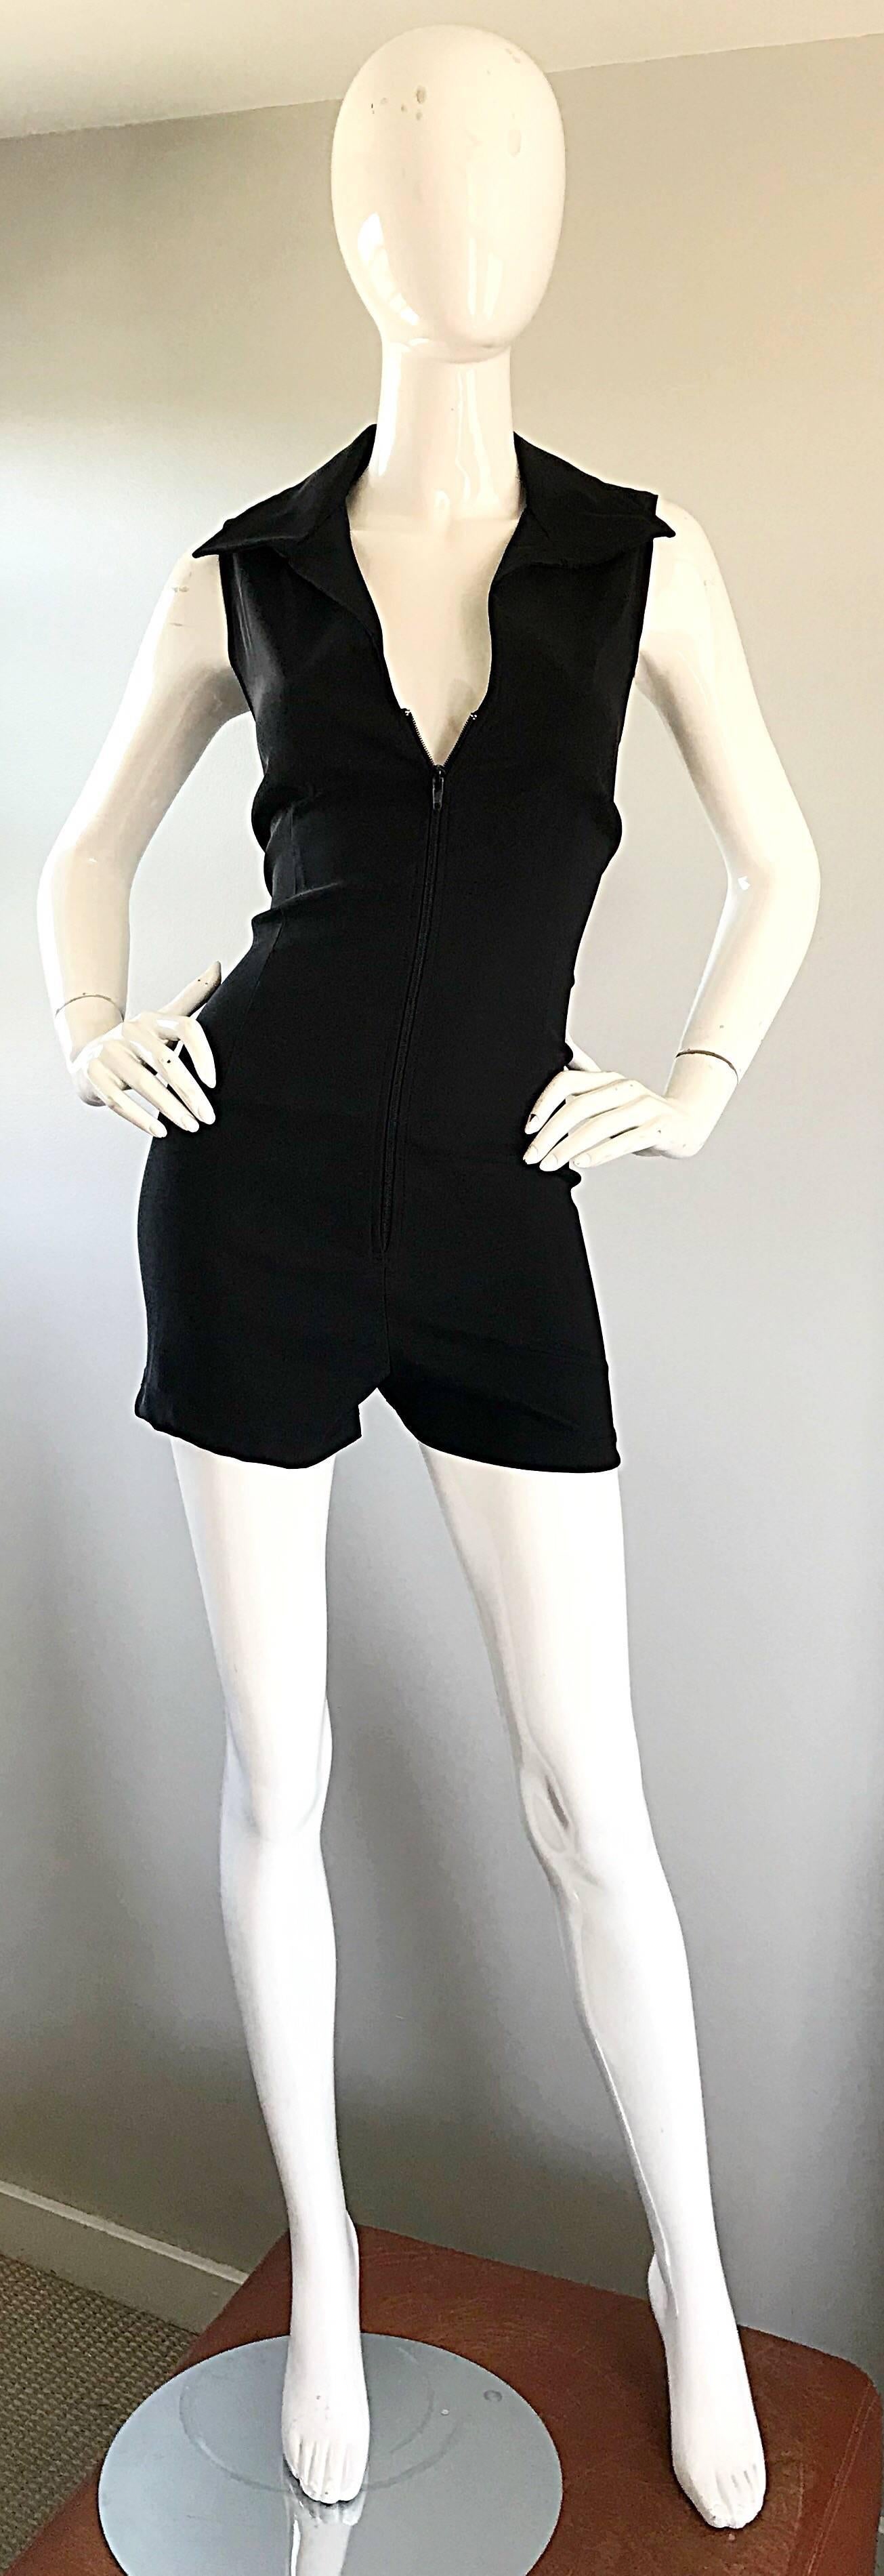 1990s Does 1970s Black Crepe Sleeveless One Piece 90s Vintage Romper Jumpsuit In Excellent Condition For Sale In San Diego, CA